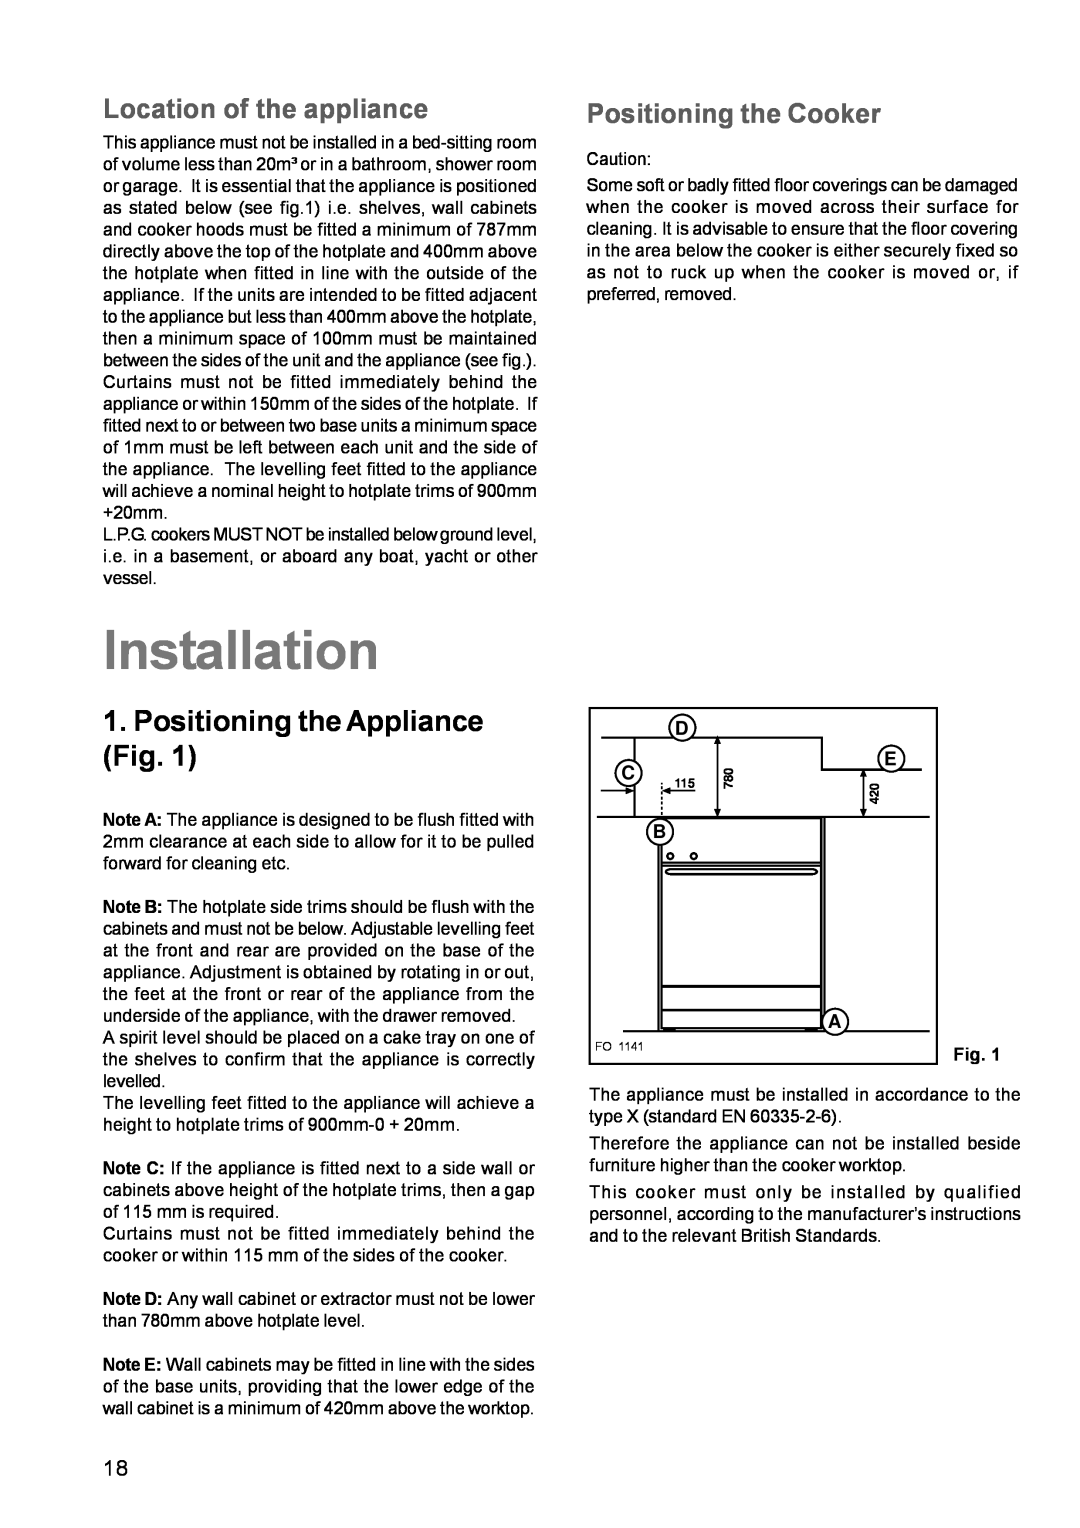 Zanussi ZCG 611 manual Installation, Positioning the Appliance Fig, Location of the appliance, Positioning the Cooker 